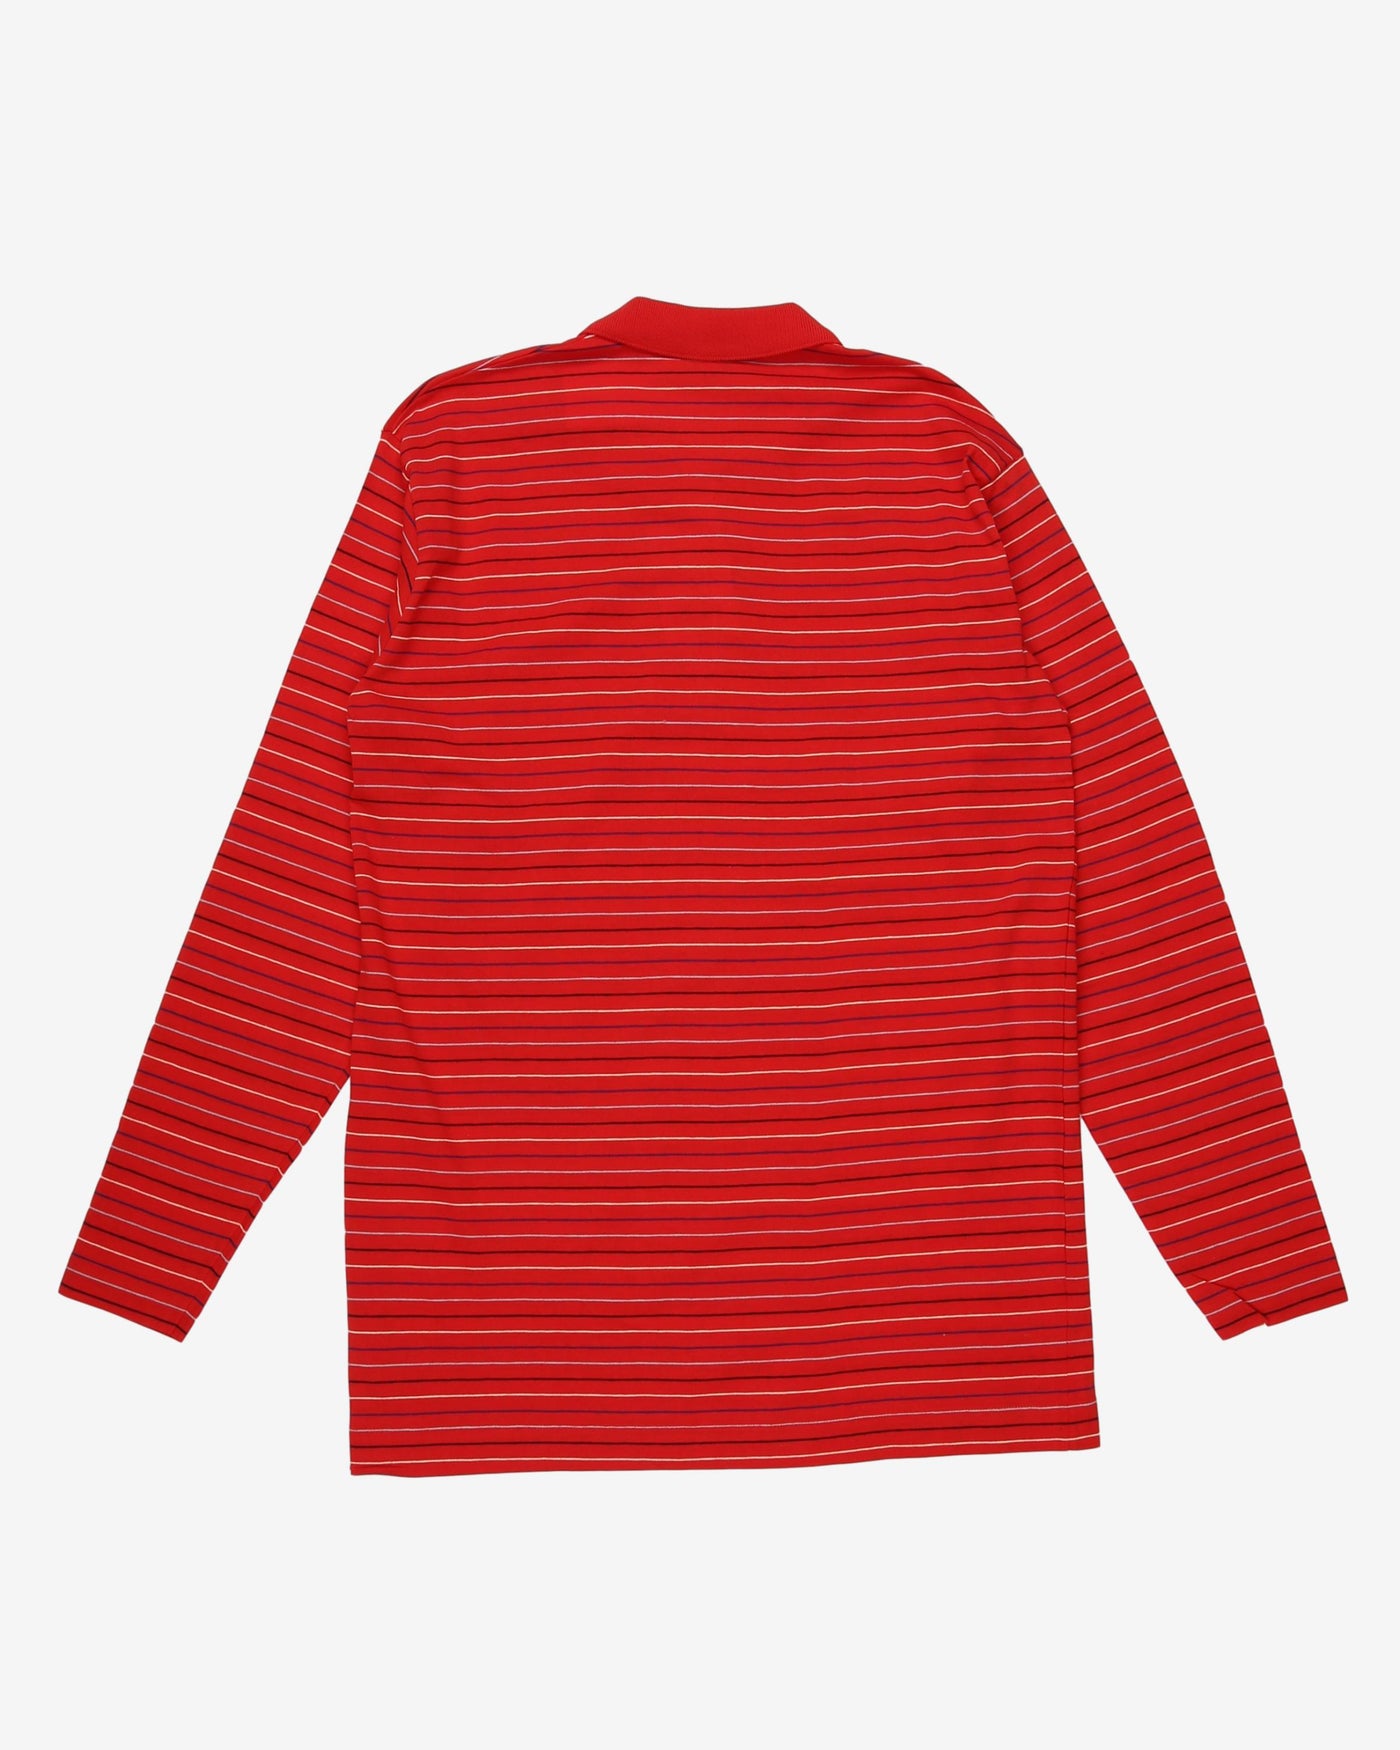 Benetton deadstock red striped polo shirt - S / M